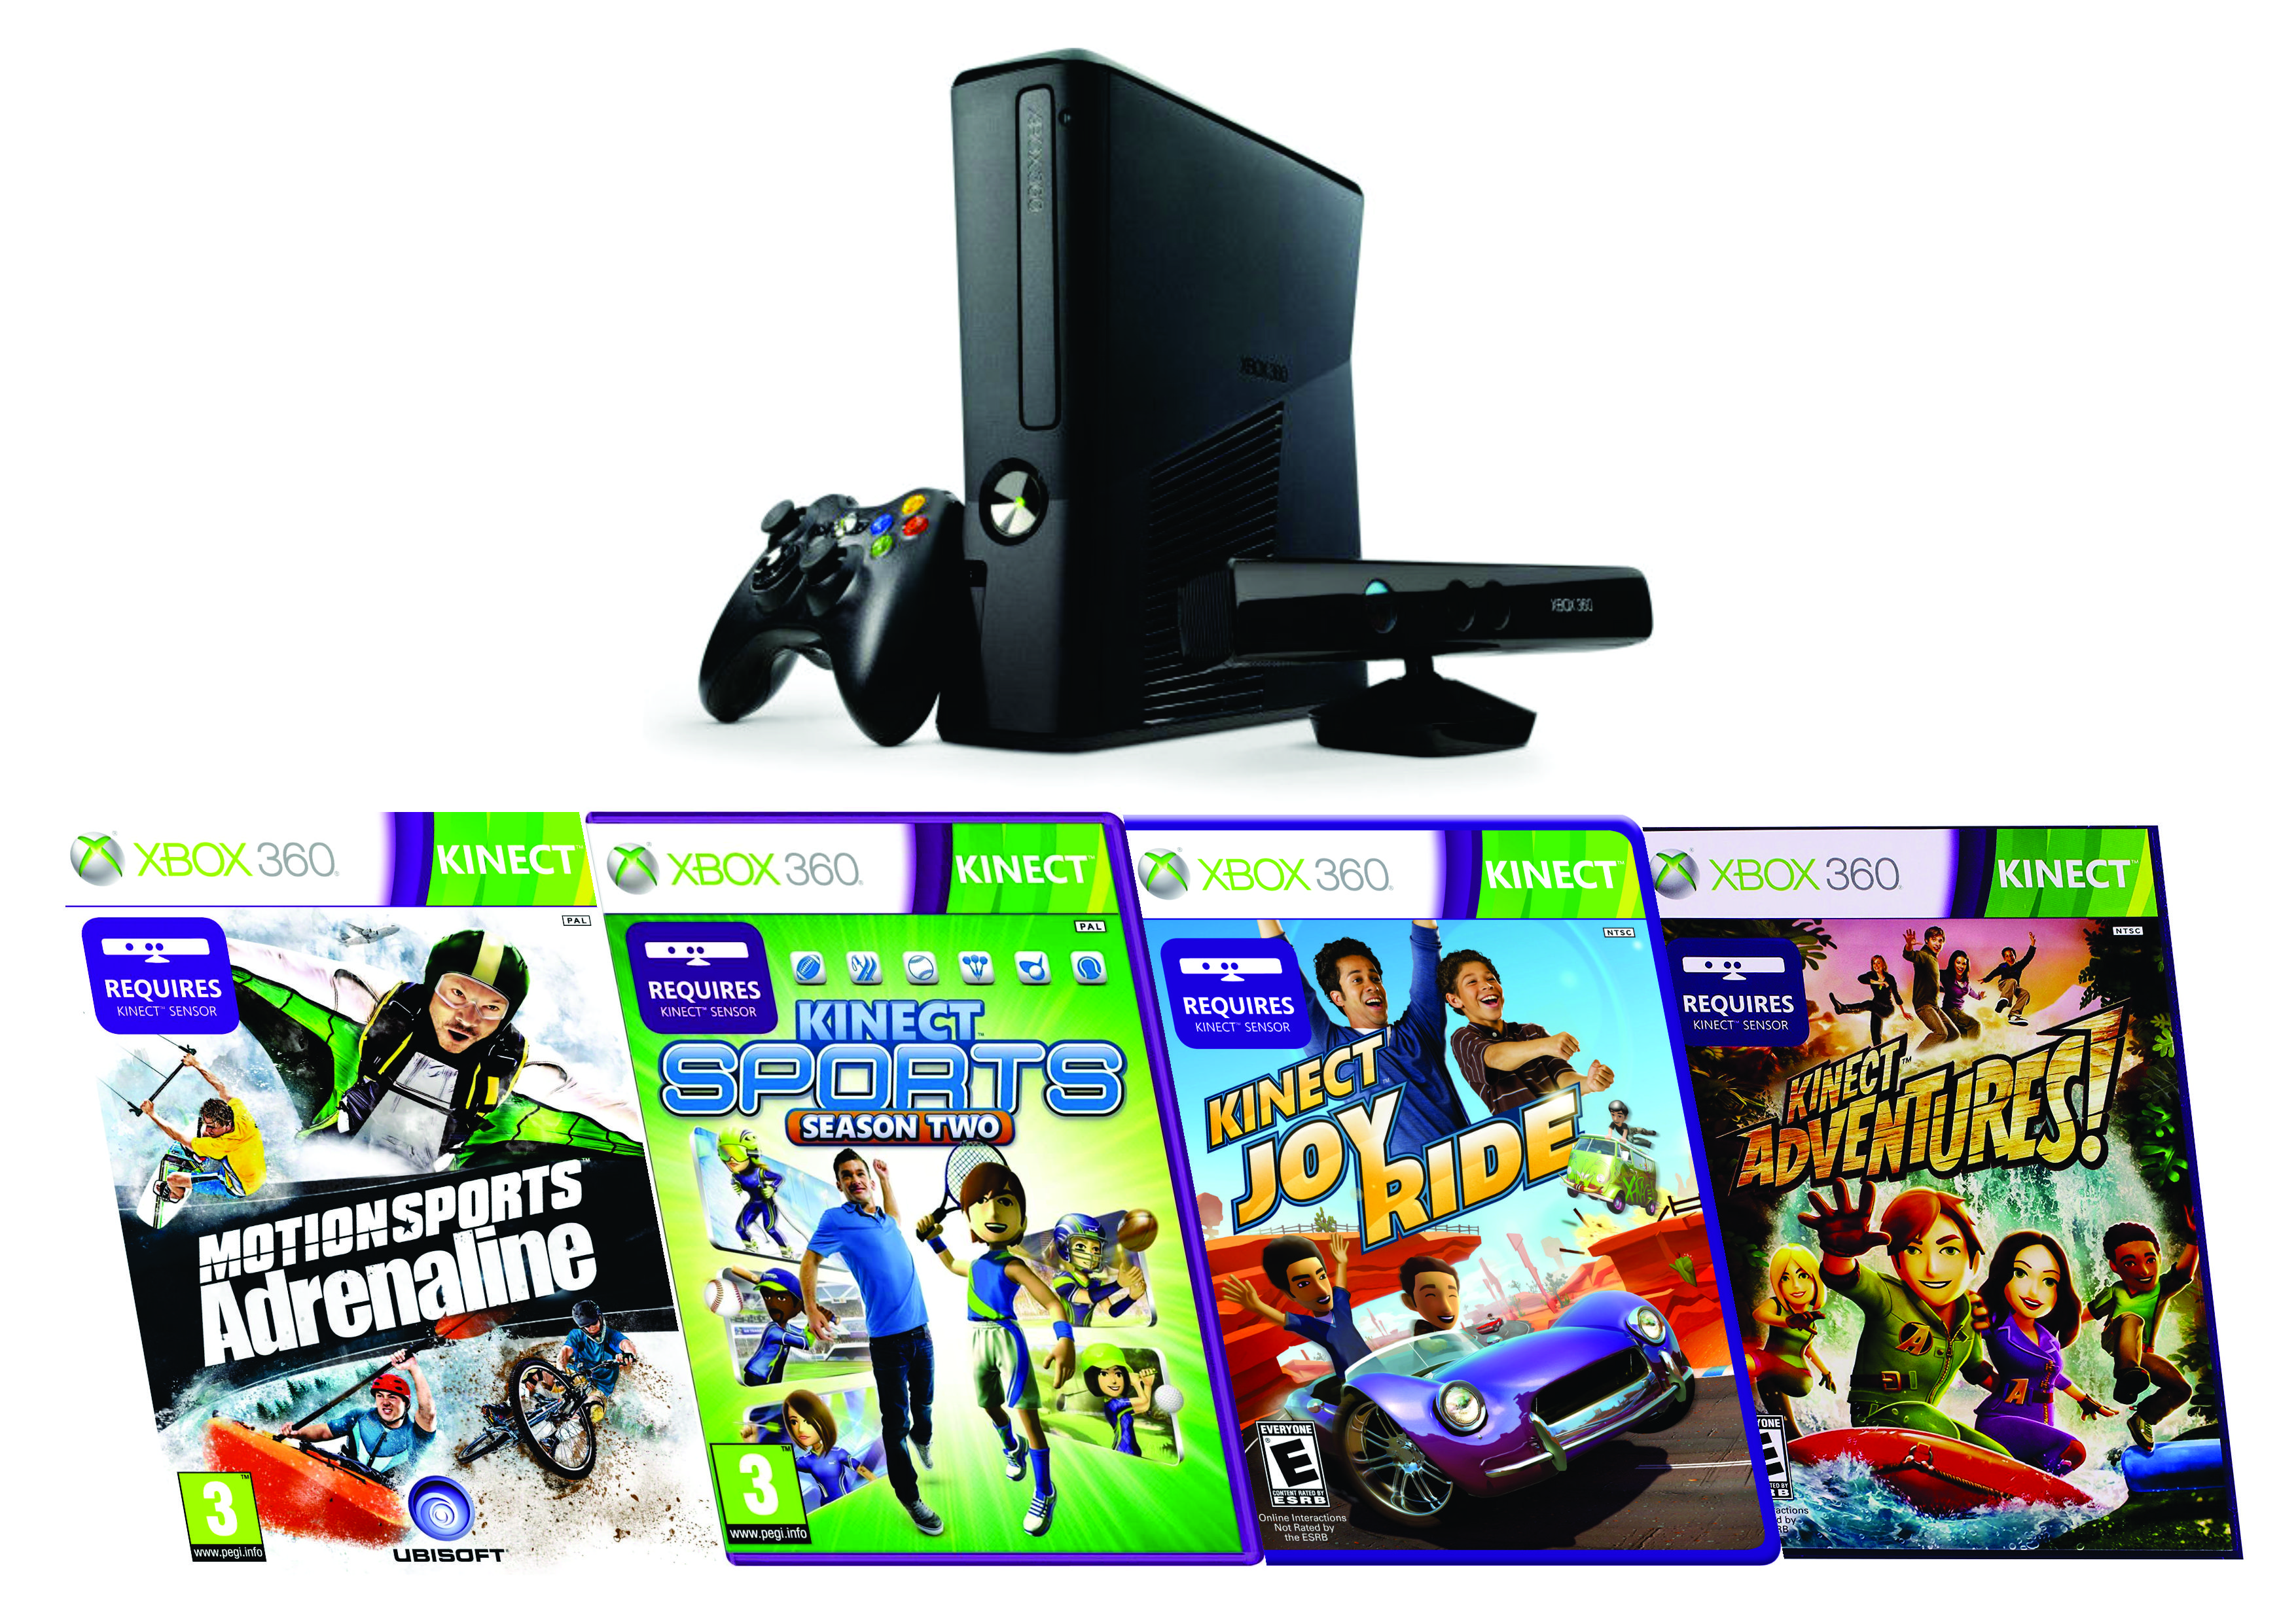 Xbox 360 Console With Kinect and Controller Games.